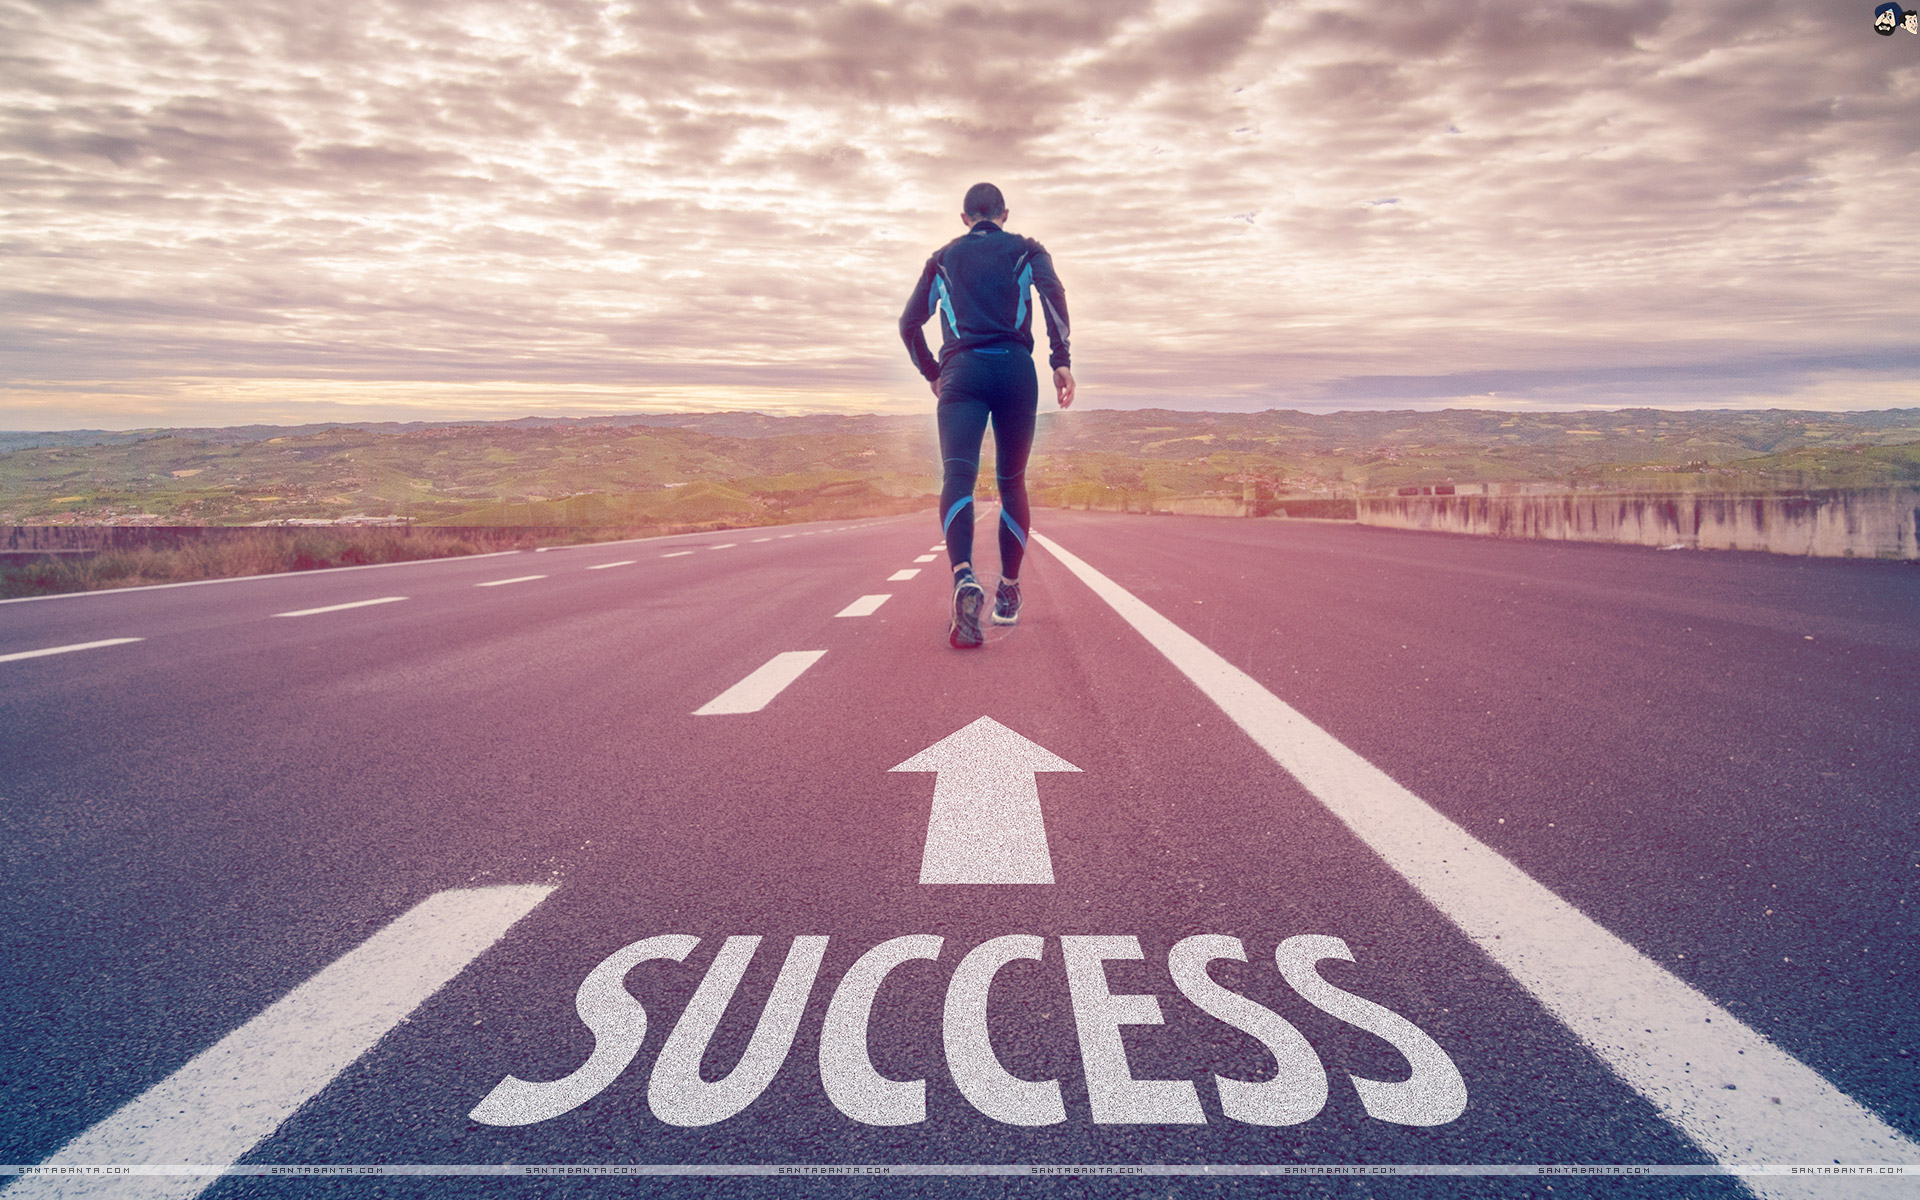 Motivational Wallpaper On The Road To Success - Success In My Life